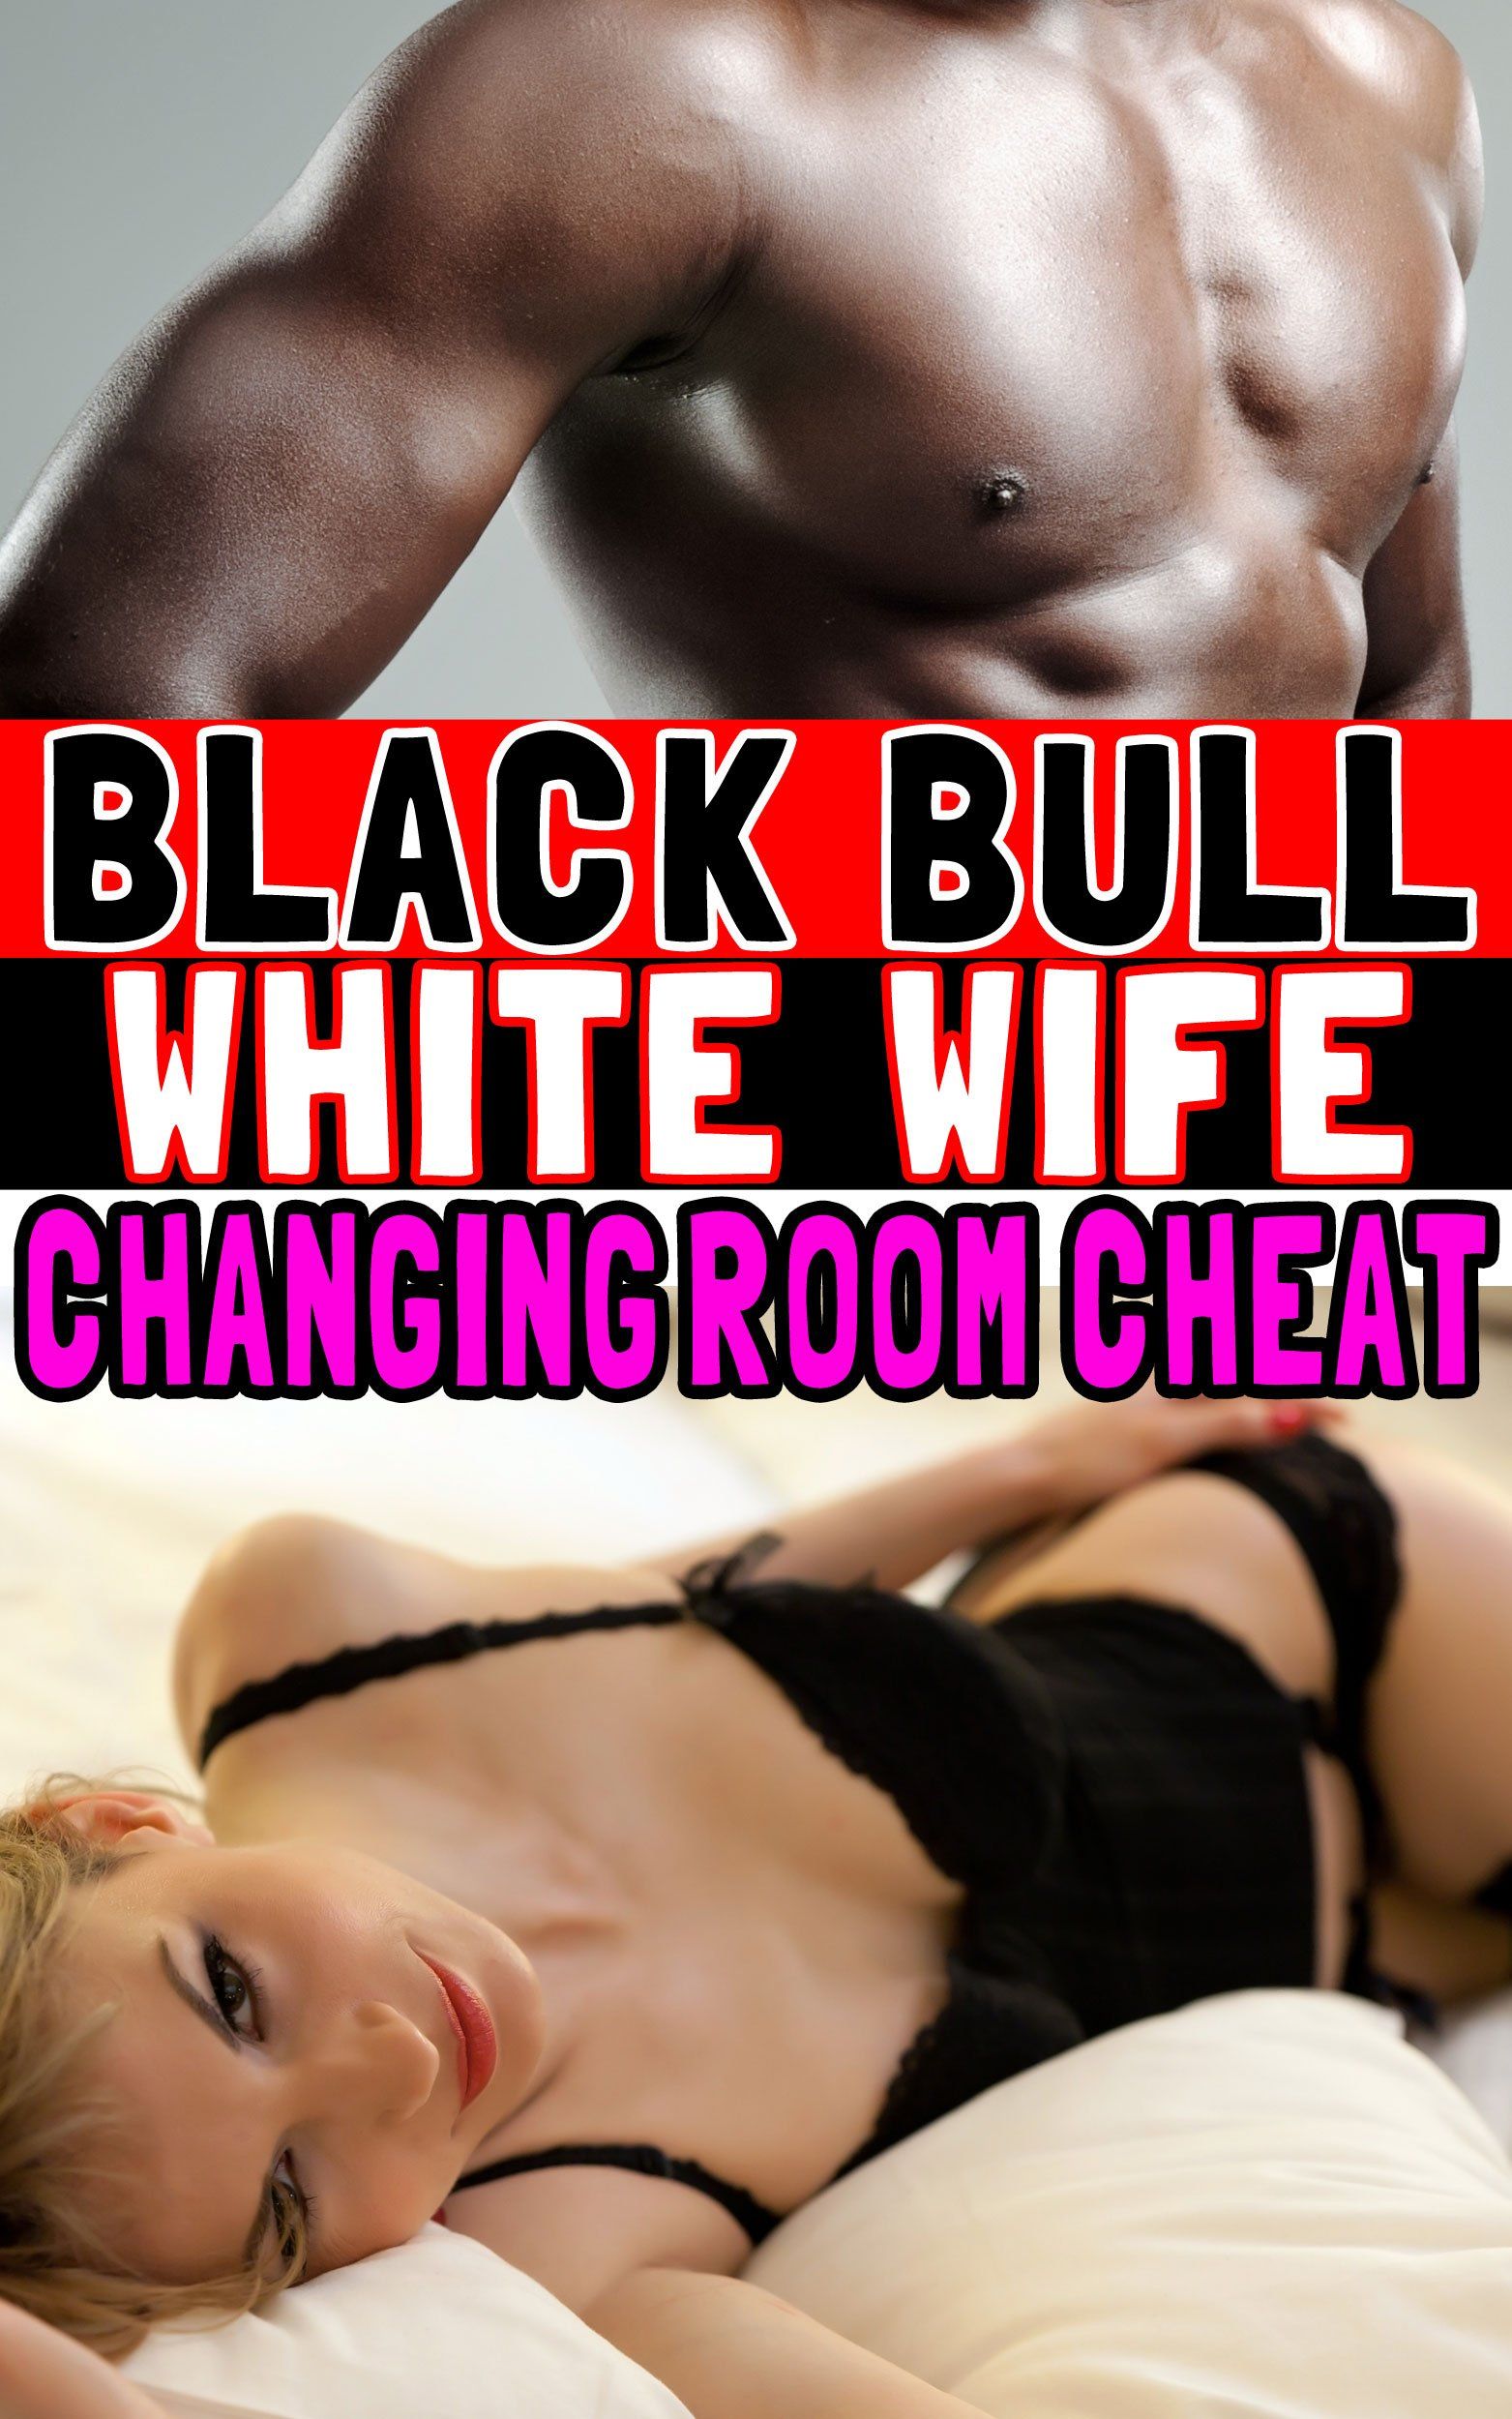 Interracial Wife Stories